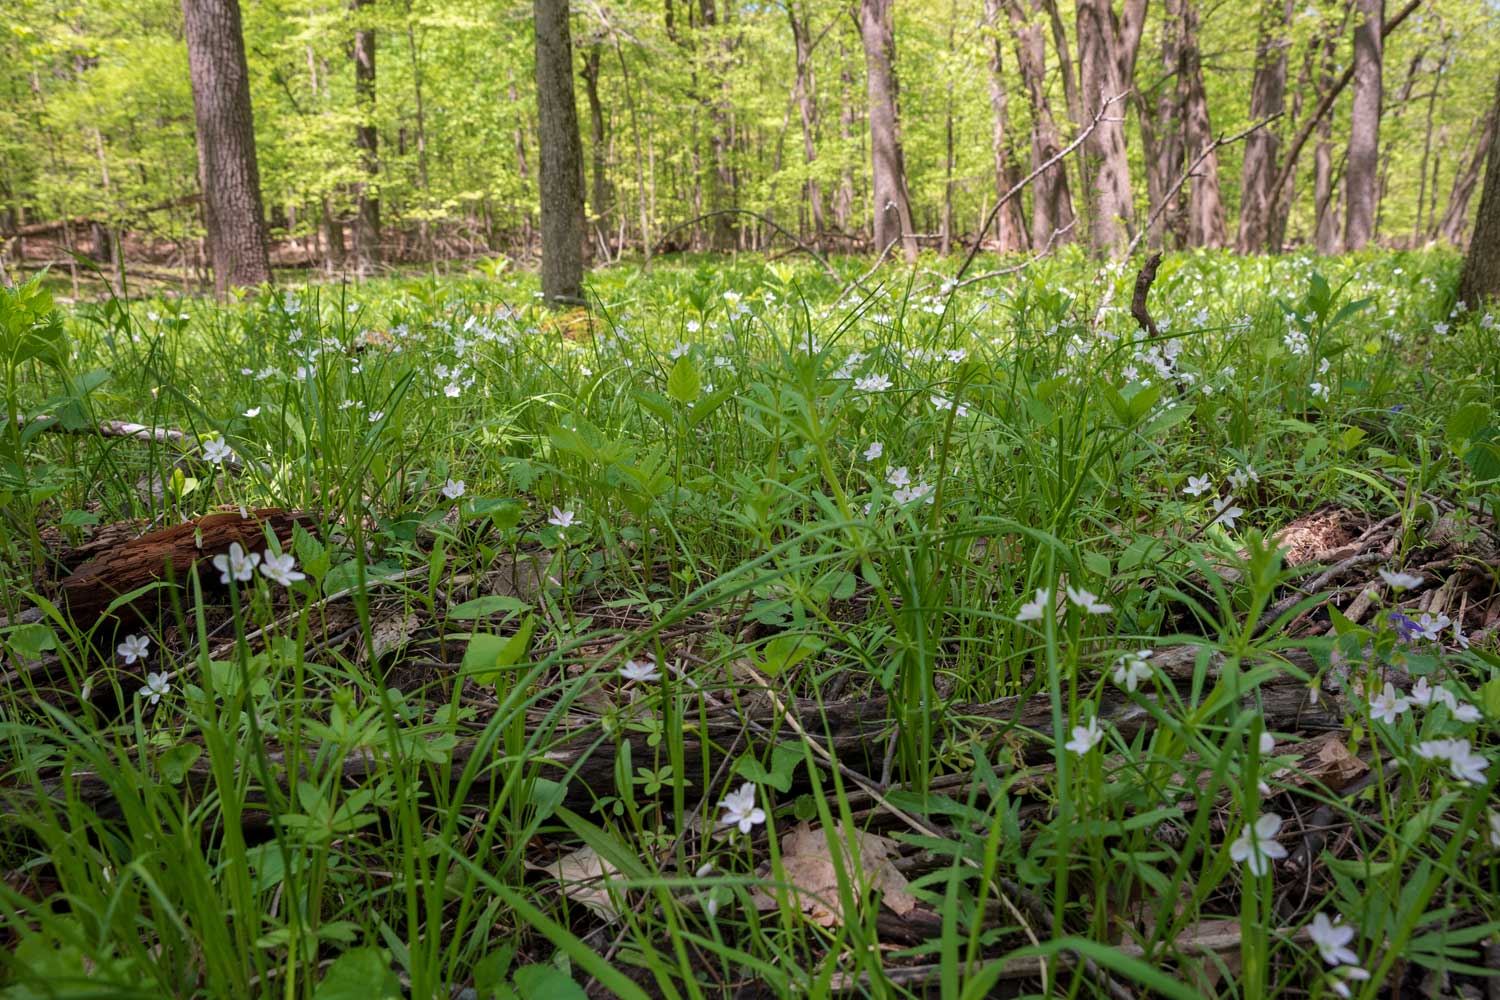 Grasses and small white wildflowers blanketing the floor with tree trunks in the background.